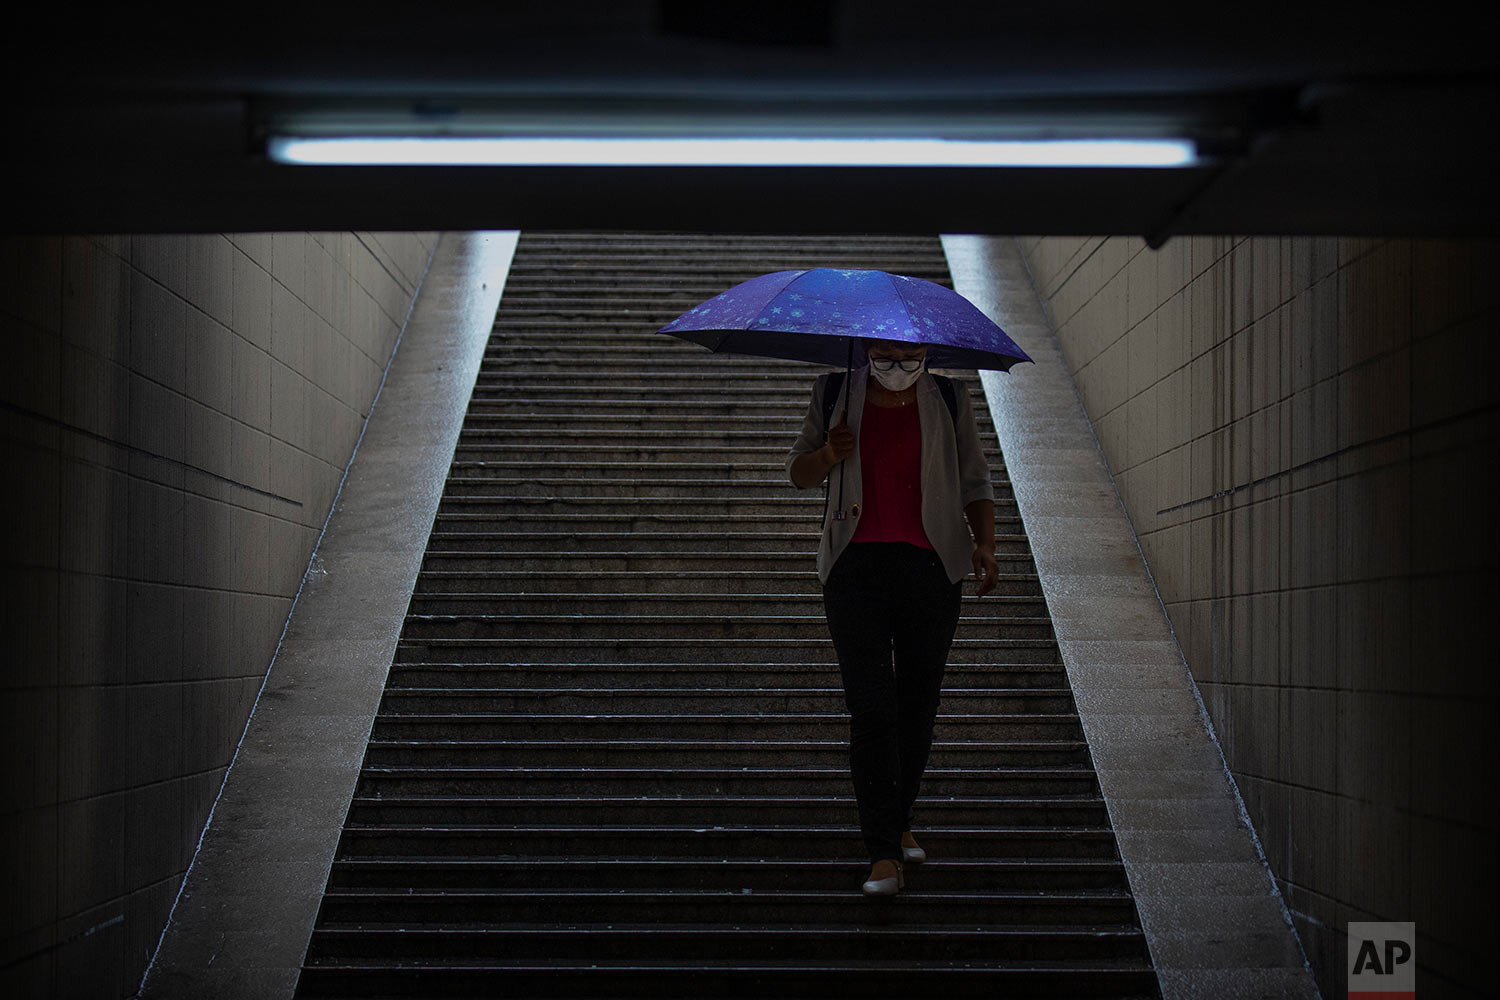  A woman wearing a face mask to protect against the coronavirus walks into the entrance of a subway station during rainfall in Beijing, Wednesday, Aug. 5, 2020.  (AP Photo/Mark Schiefelbein) 